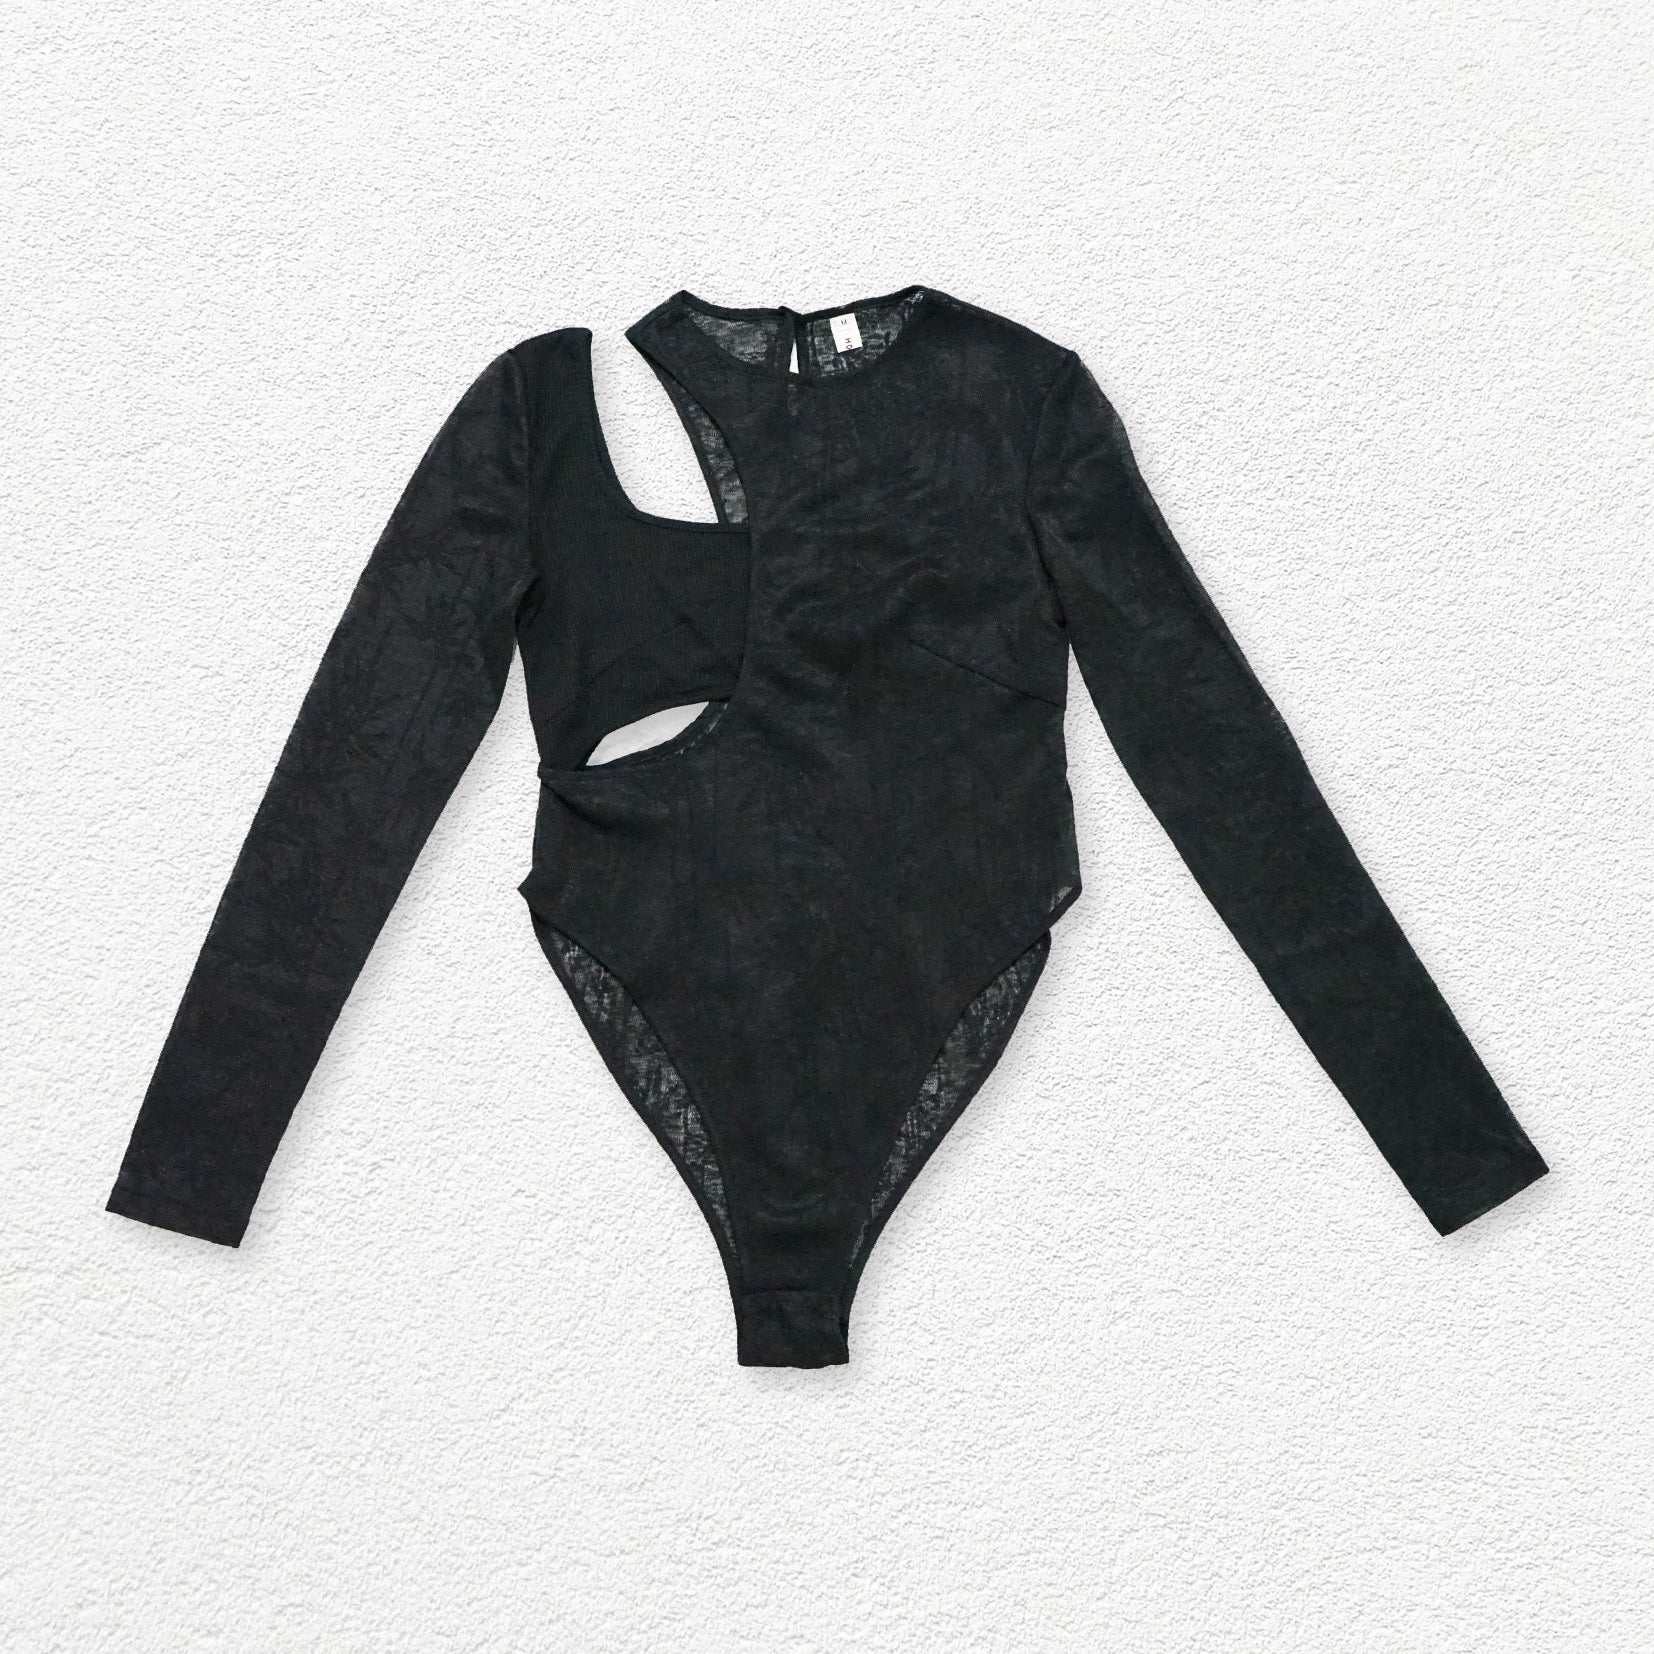 Double layer see-through cut out bodysuit - black